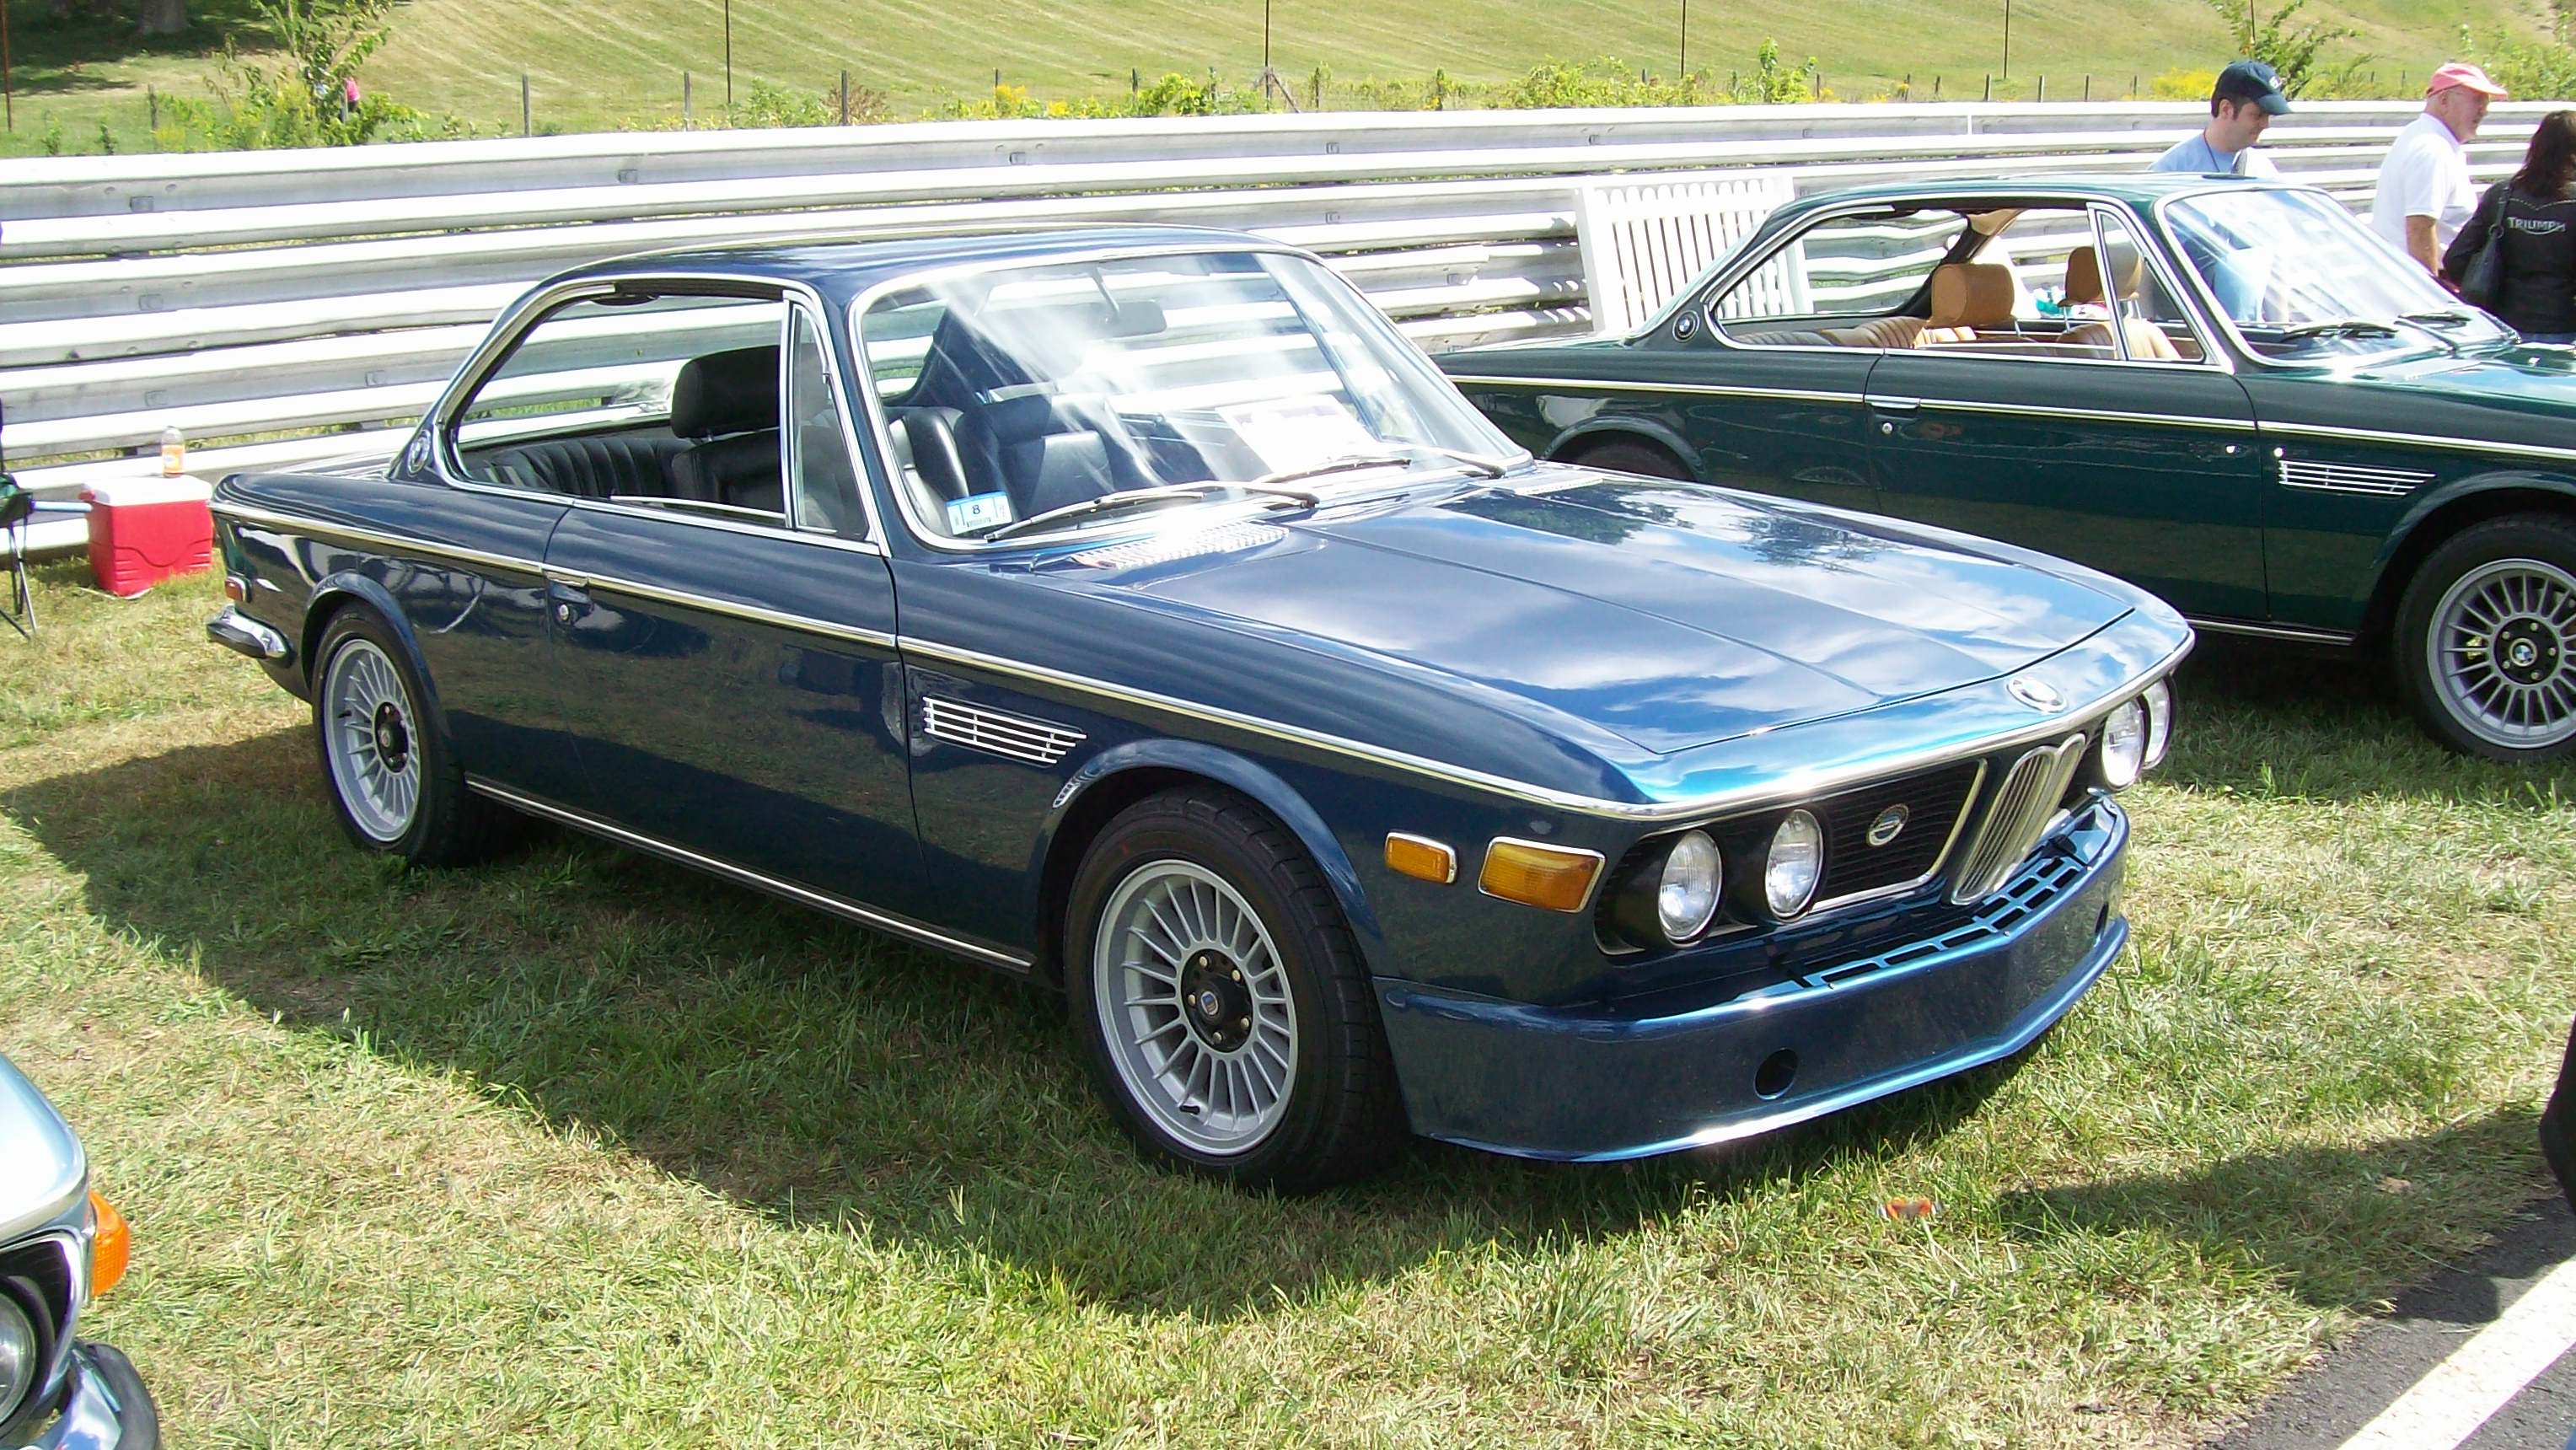 A Fully Race-Prepared 3.0CSL. These are very attractive street cars